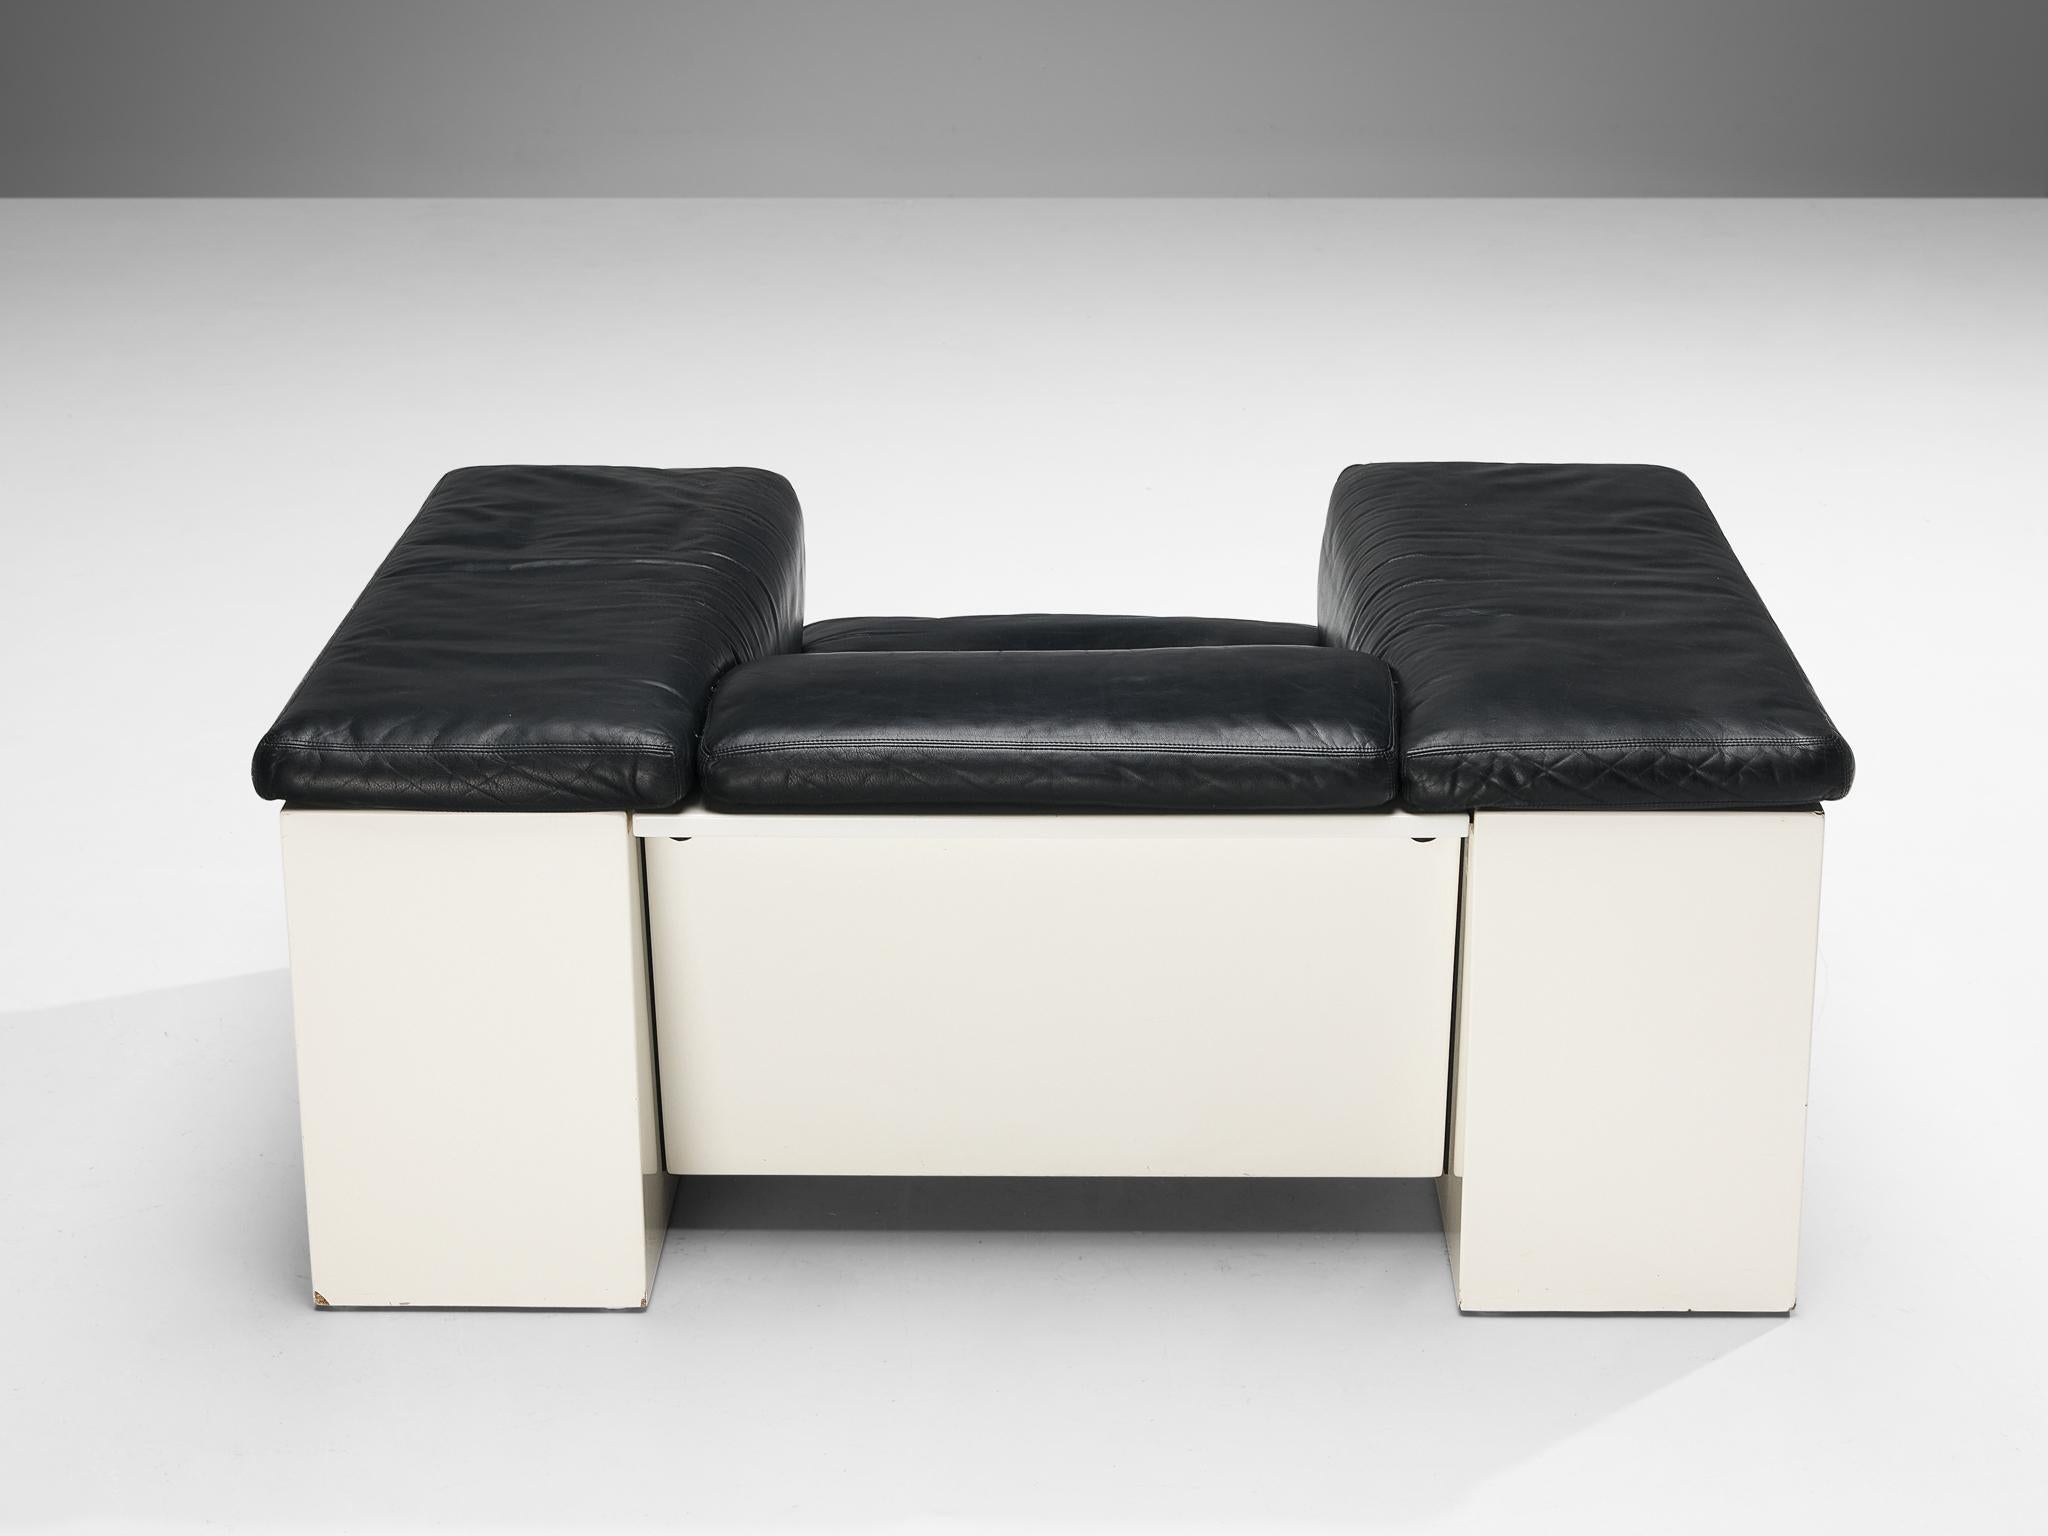 Cini Boeri for Knoll 'Brigadiere' Living Room Set in Black Leather  For Sale 1